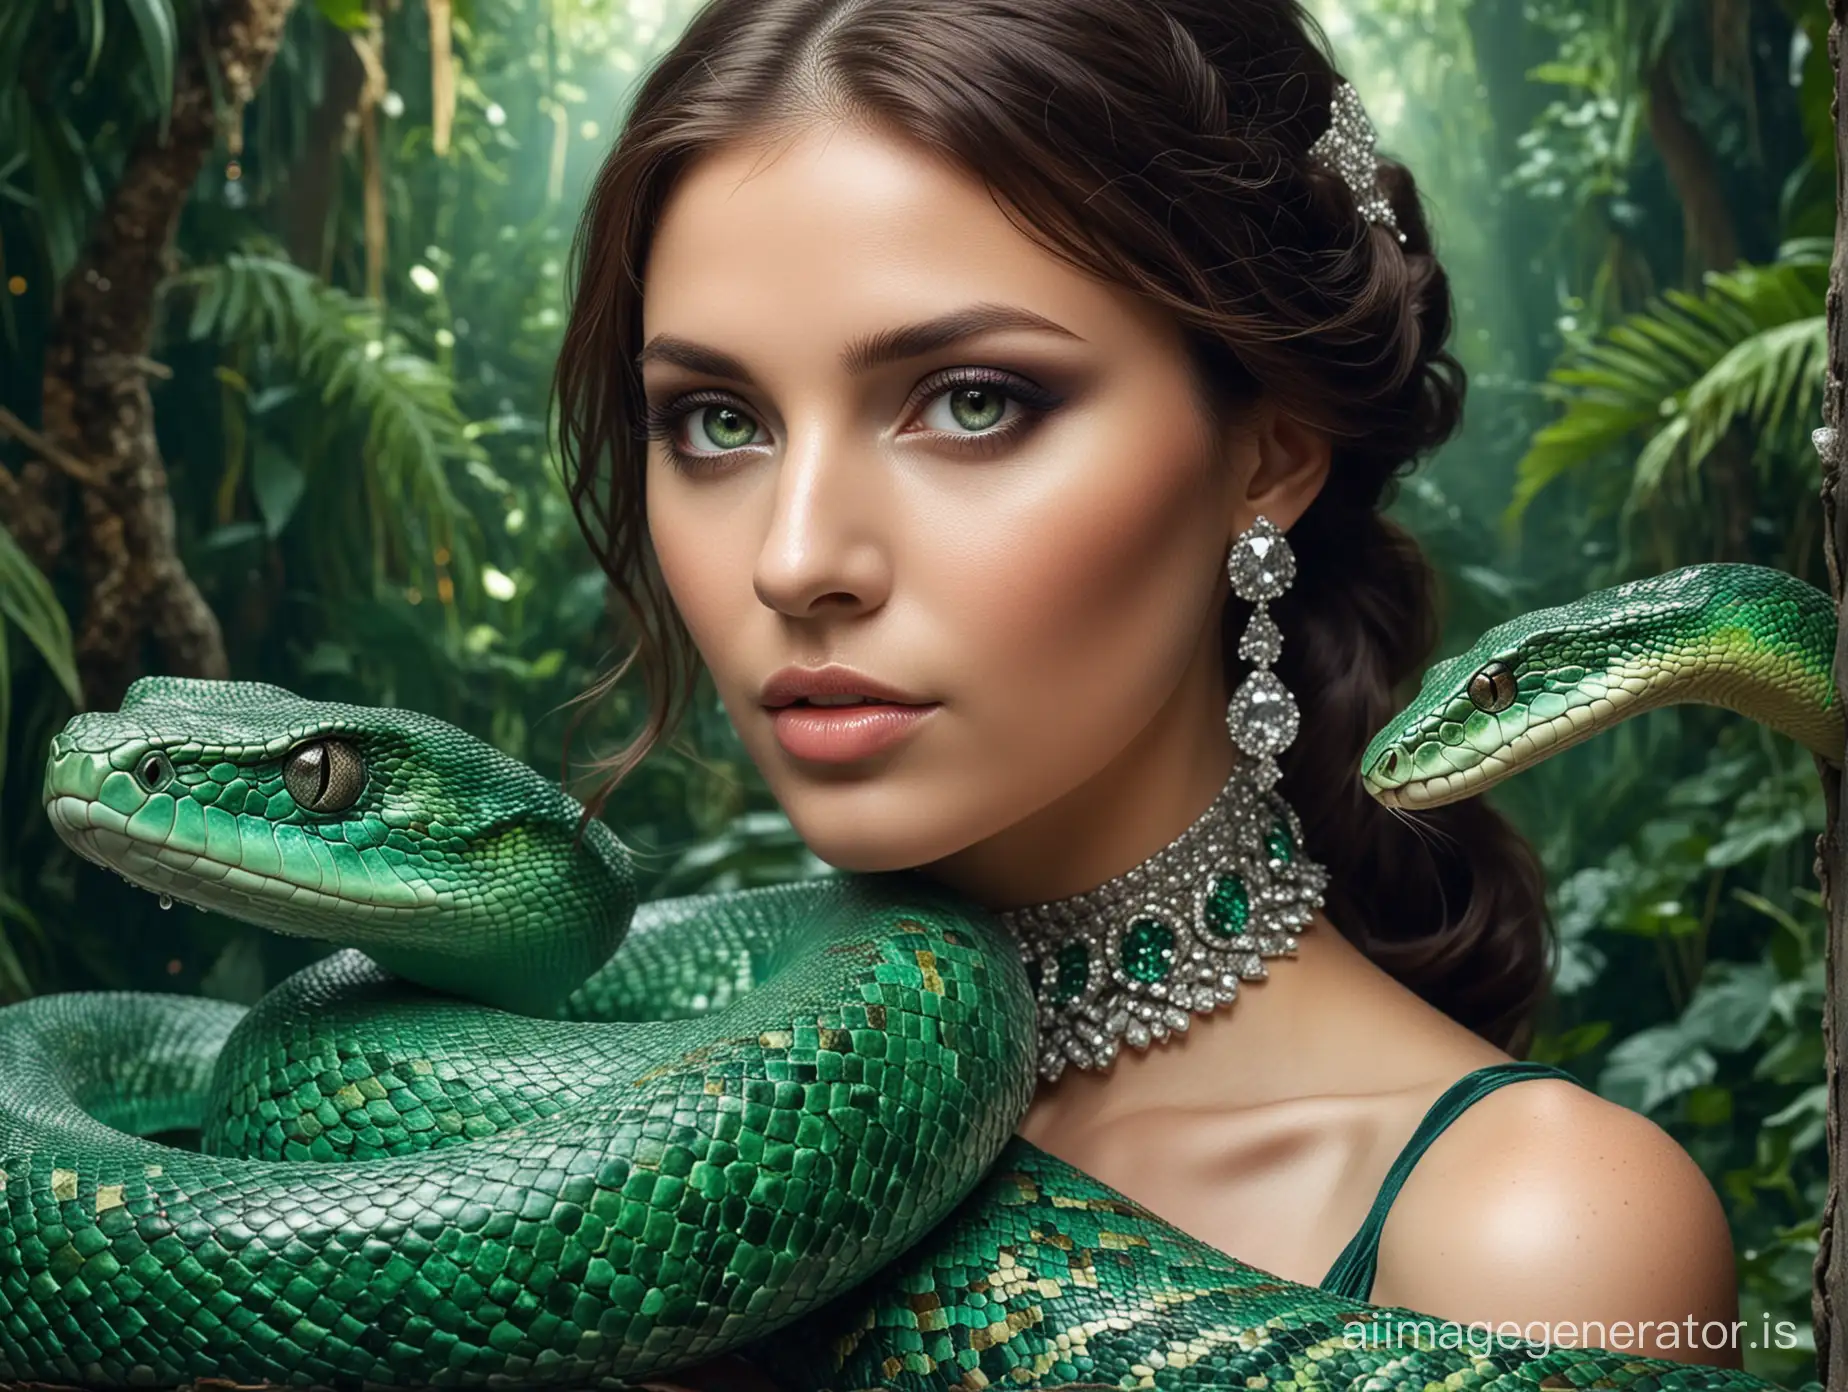 Enchanting-Encounter-Woman-and-Giant-Emerald-Snake-in-Surreal-Landscape